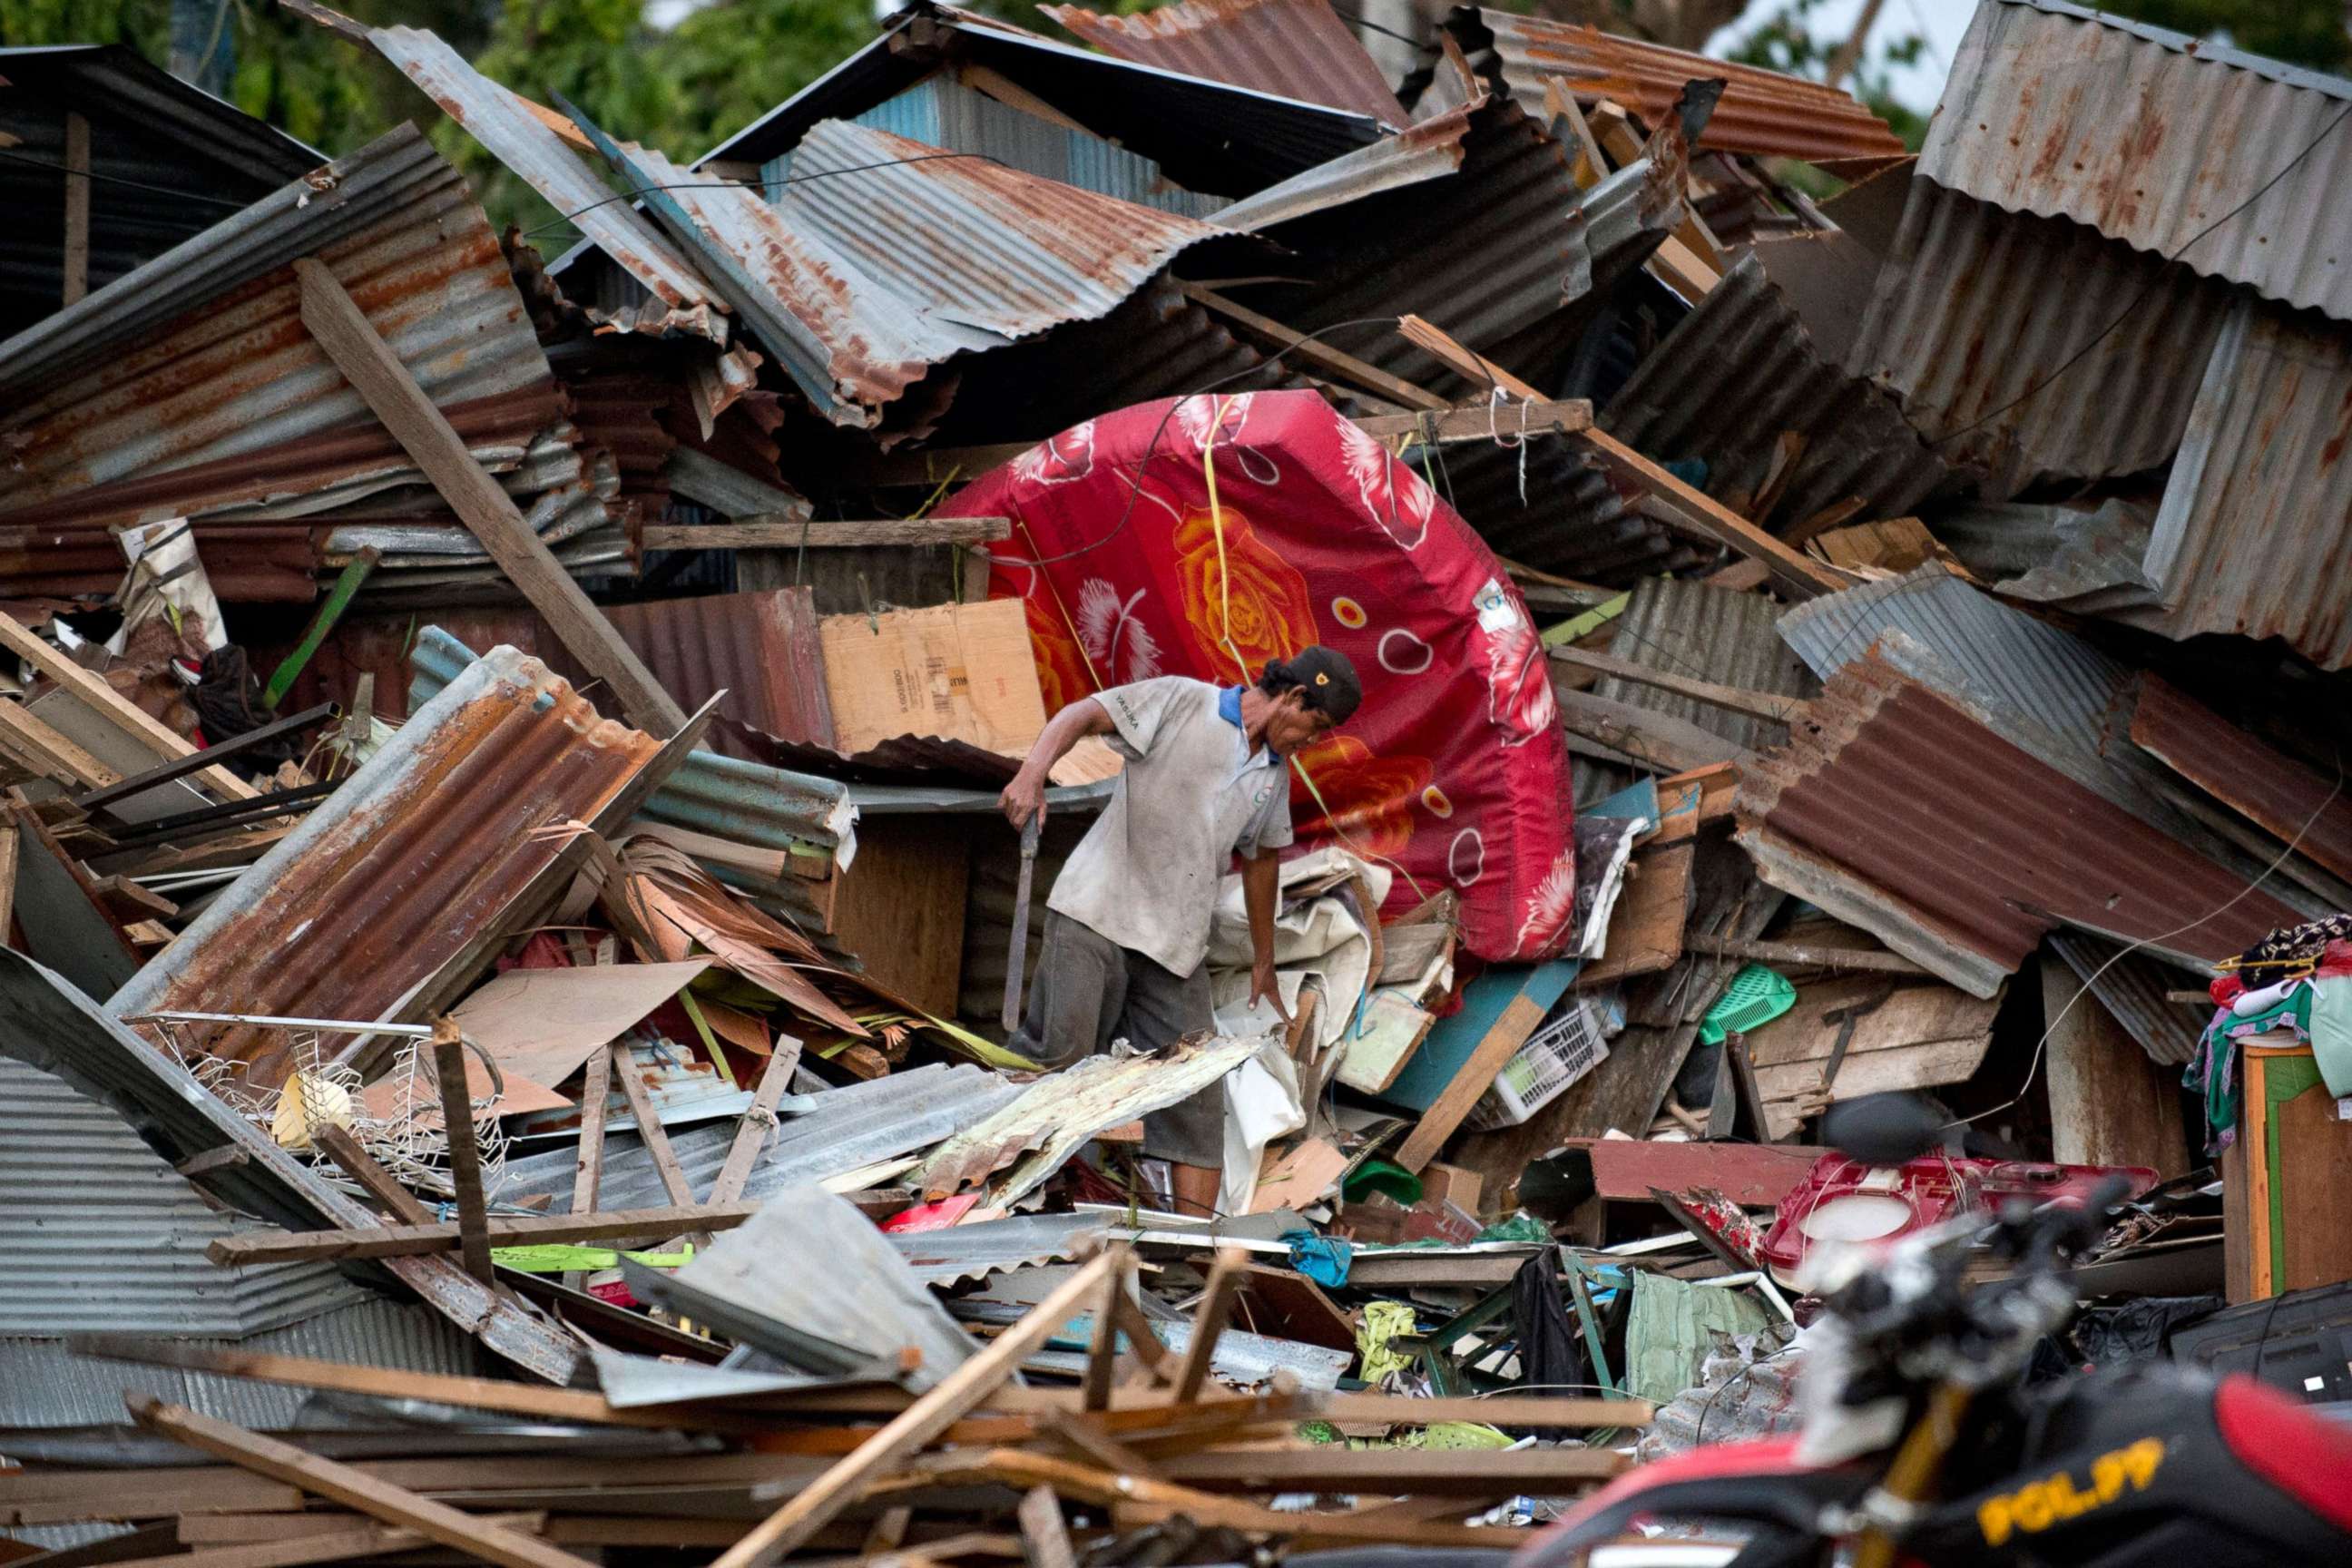 PHOTO: A man looks for his belongings amid the debris of his destroyed house in Palu in Central Sulawesi on Sept. 29, 2018, after a strong earthquake and tsunami struck the area.